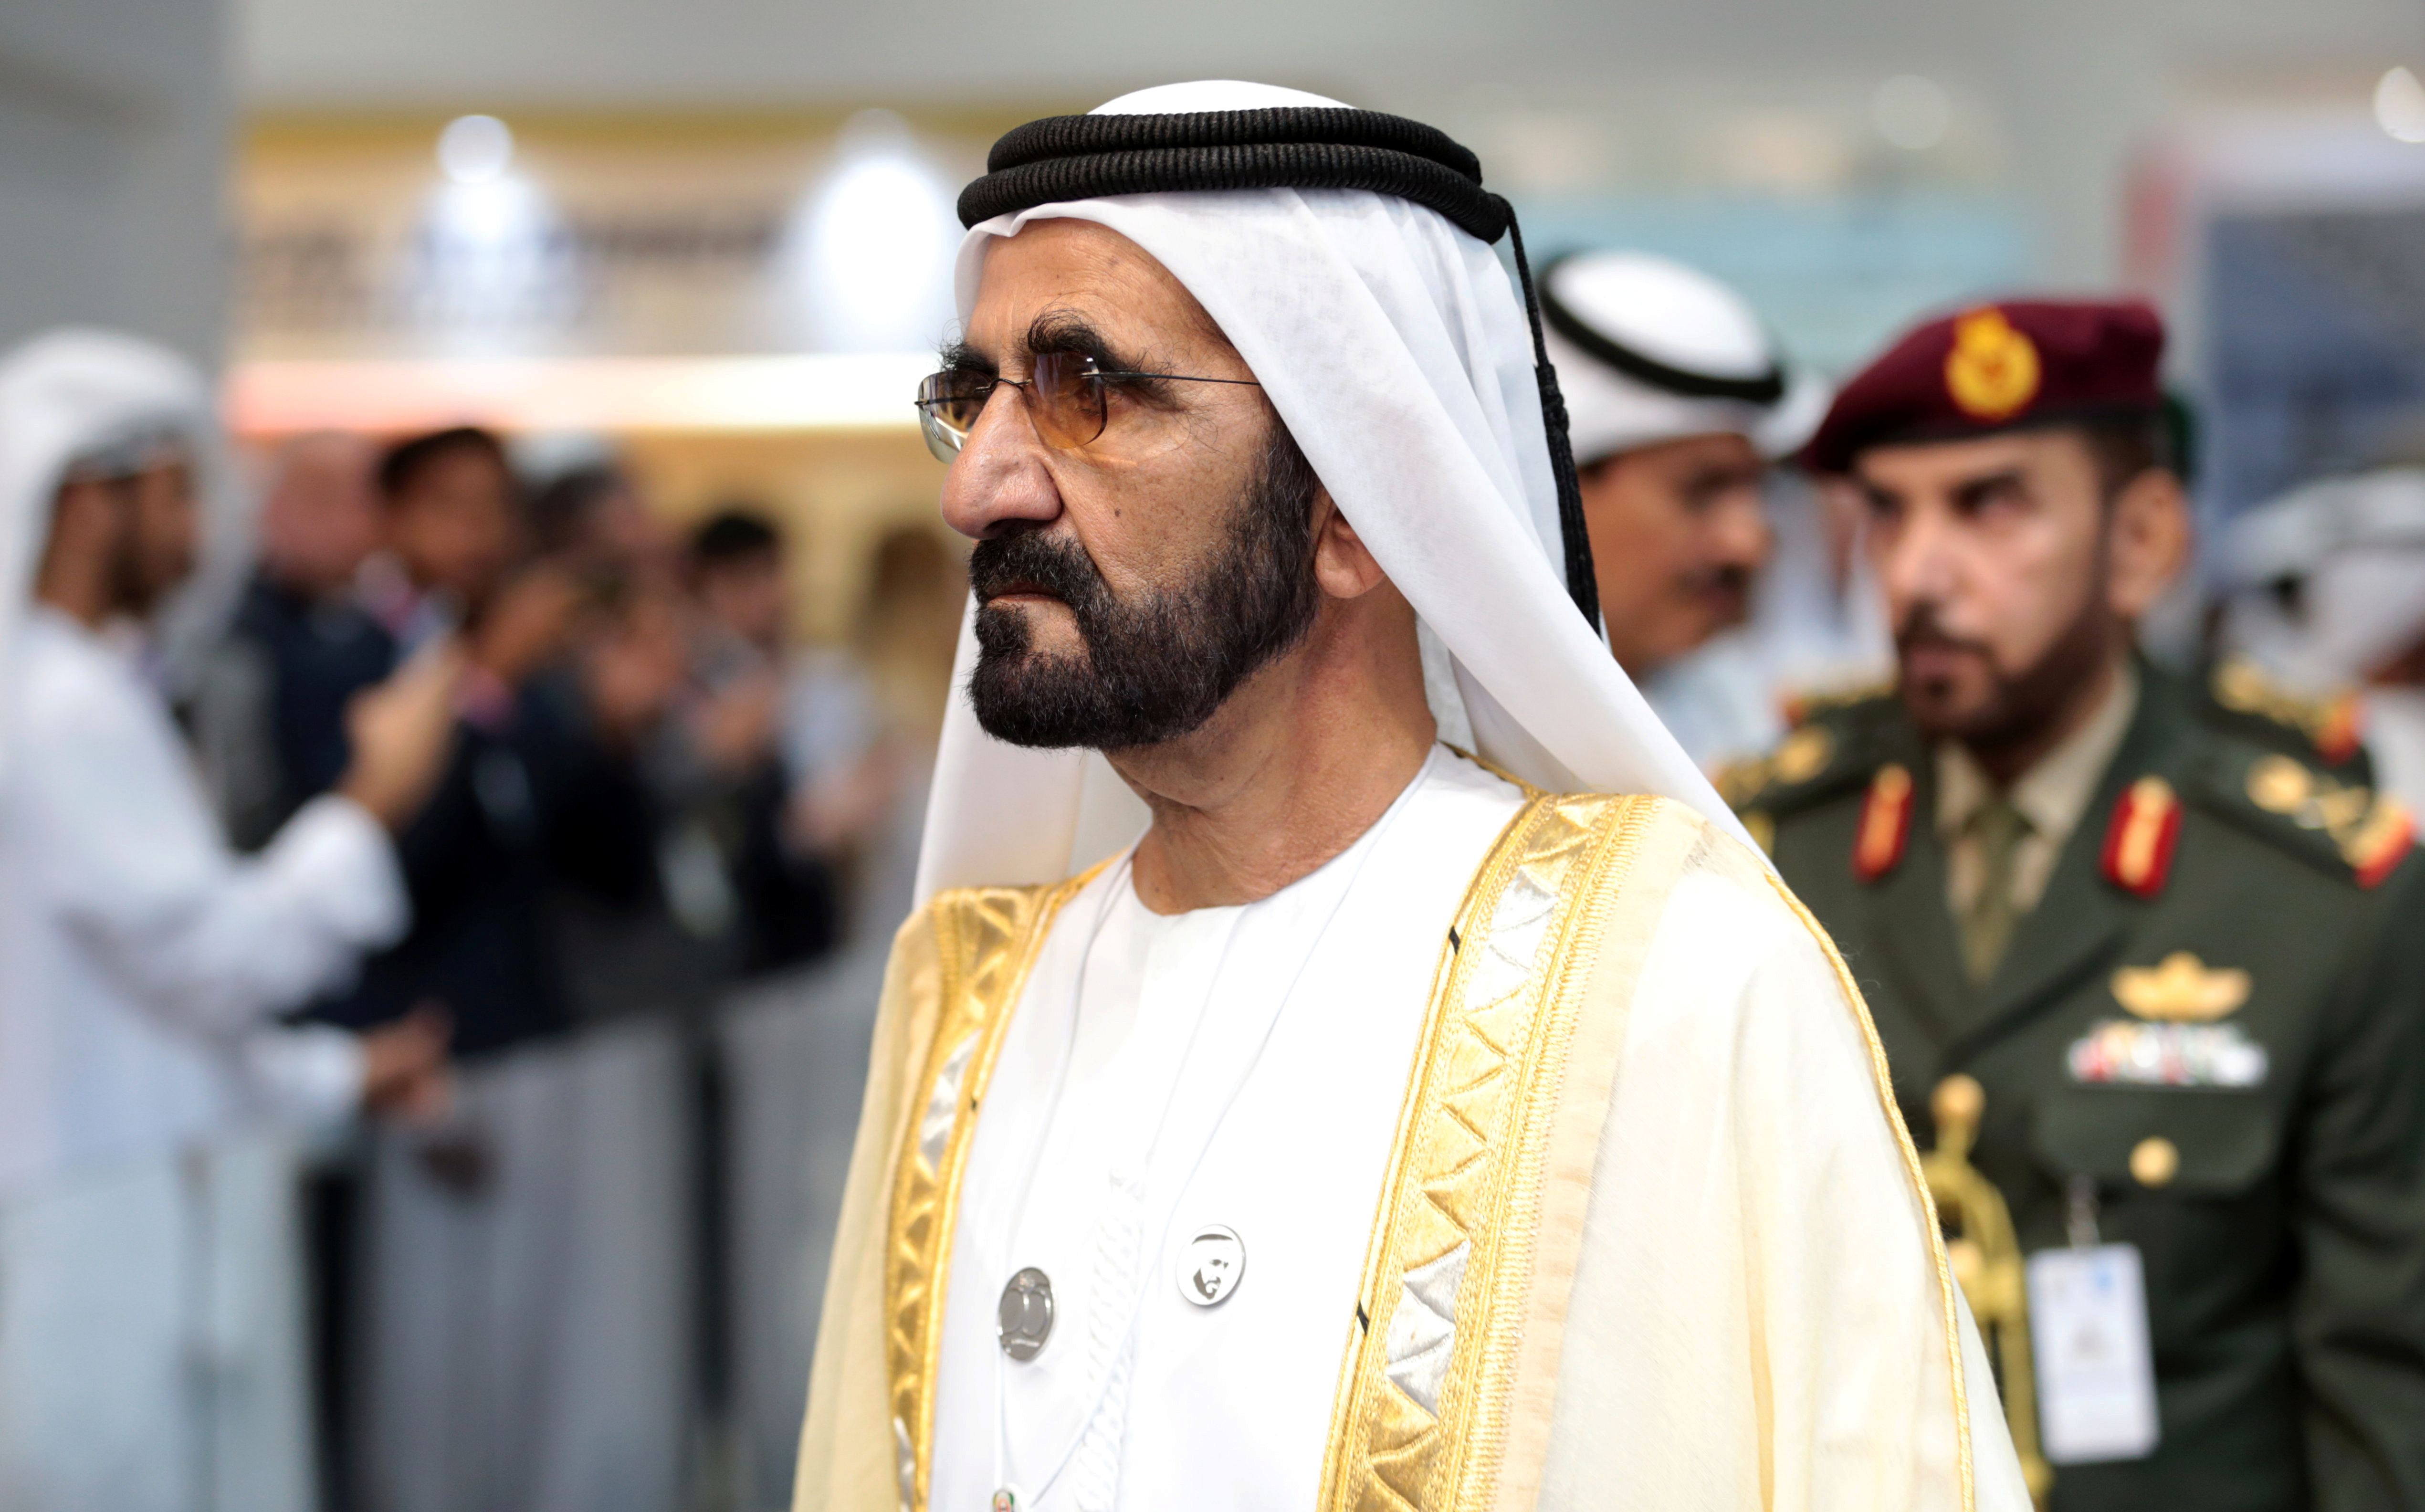 Dubai's Ruler Sheikh Mohammed bin Rashid al-Maktoum, Prime Minister and Vice-President of the United Arab Emirates attends the International Defence Exhibition & Conference (IDEX) in Abu Dhabi